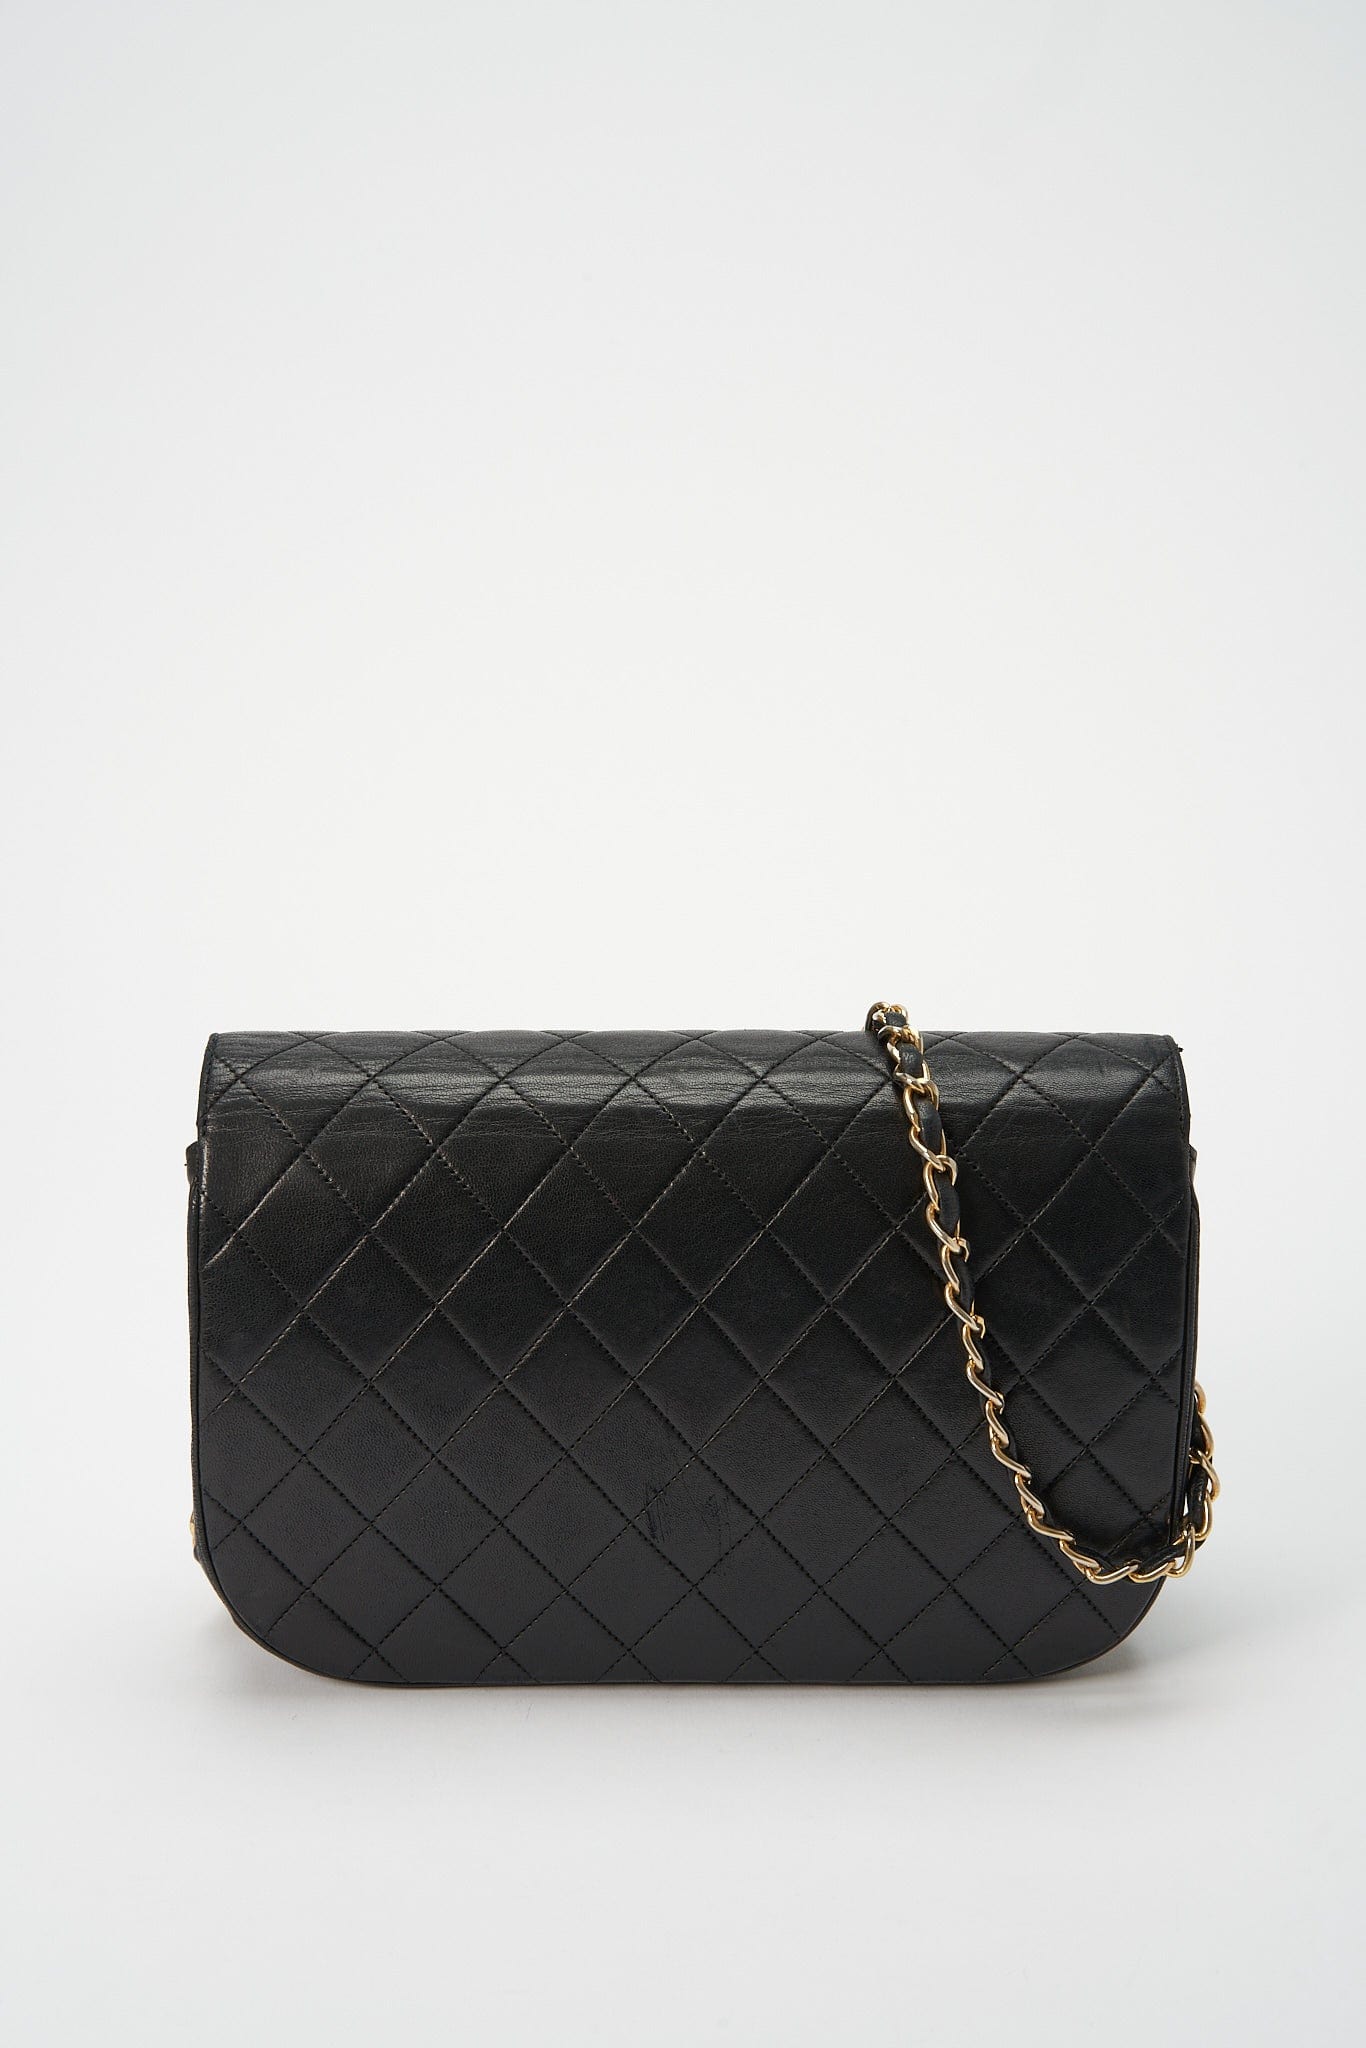 chanel square quilted flap bag